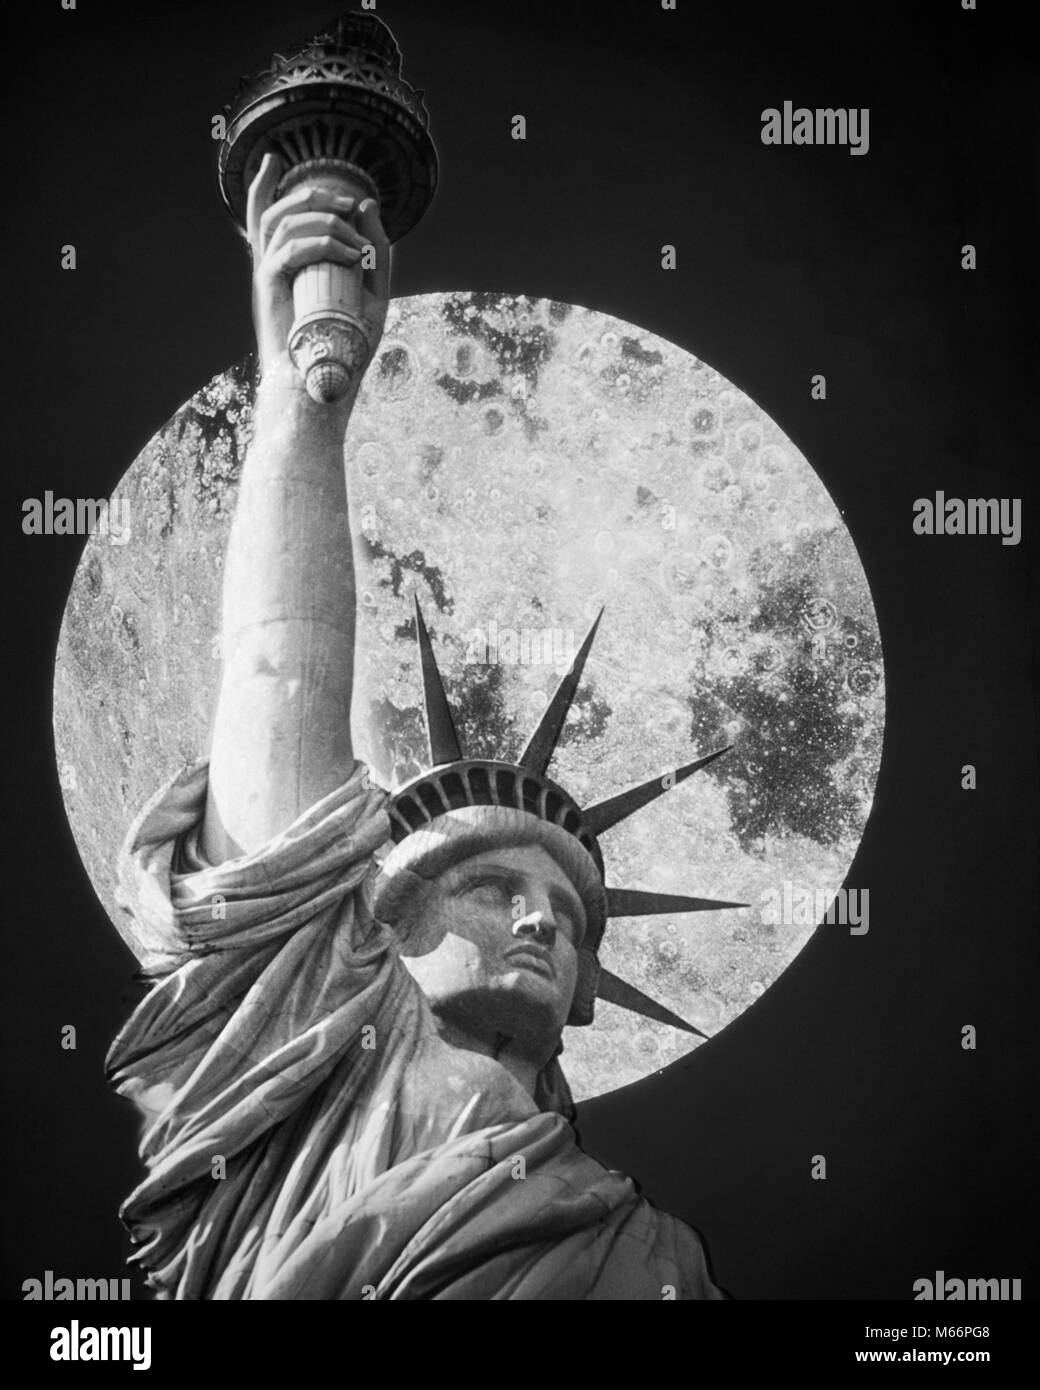 STATUE OF LIBERTY SHOWN FROM BUST UP FULL MOON IN BACKGROUND NEW YORK CITY USA - r27762 PHT001 HARS UNITED STATES TORCH ICON INSPIRATION UNITED STATES OF AMERICA NY SPIRITUALITY MONUMENT NOSTALGIA NORTH AMERICA LUNAR FREEDOM NORTH AMERICAN IMMIGRANTS ICONS DREAMS URBAN CENTER STRENGTH IMMIGRANT NOBODY POWERFUL TOURIST GOTHAM NORTHEAST TRAVEL USA INNOVATION OPPORTUNITY VERTICAL ATTRACTION NYC PATRIOT POLITICS STATUARY CONCEPTUAL EAST COAST NEW YORK CITIES IMAGINATION IMMIGRATION PATRIOTIC TRAVEL NEW YORK CITY NEW YORK CITY SYMBOLIC IMMIGRATING PATRIOTISM STATUE OF LIBERTY STATUES Stock Photo